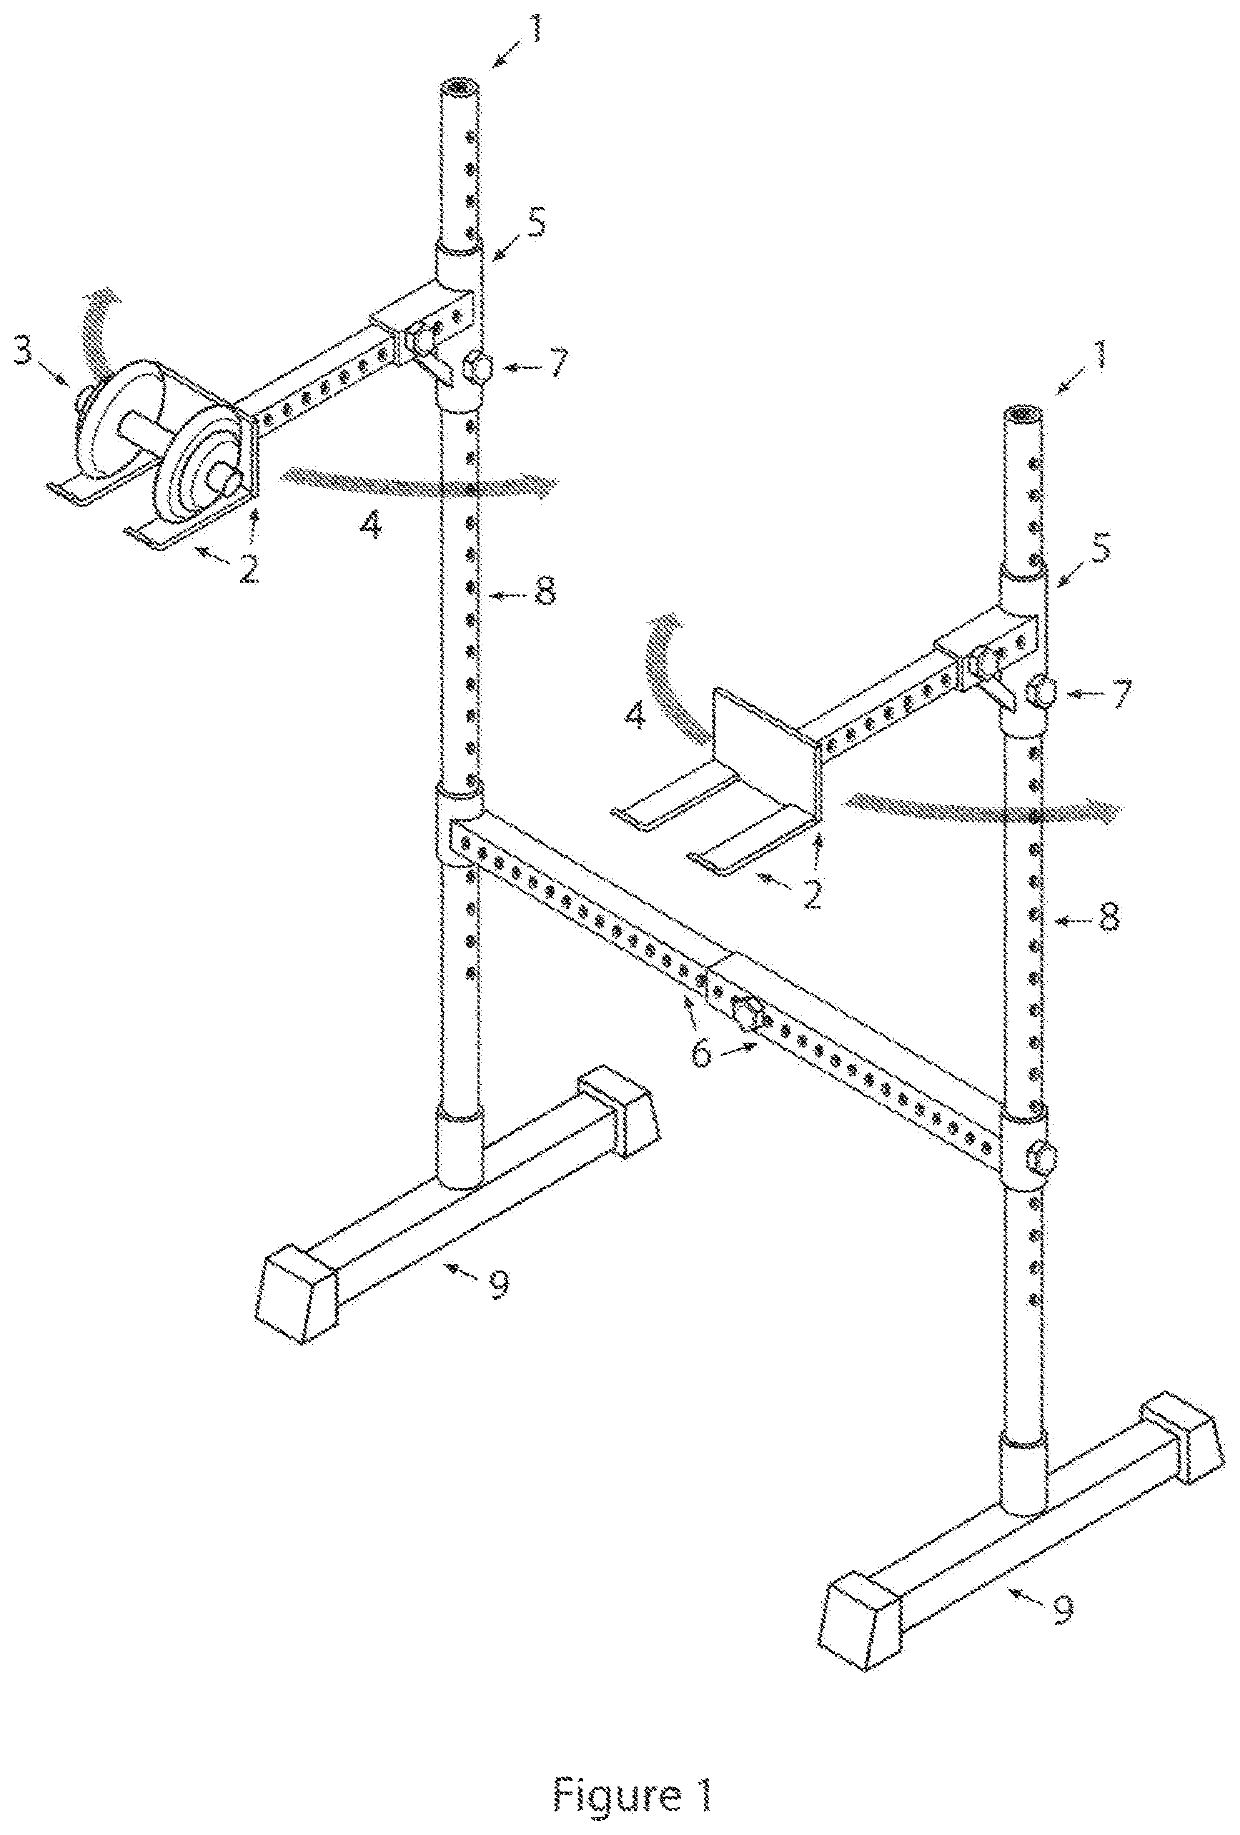 Device to position dumbbells for exercise